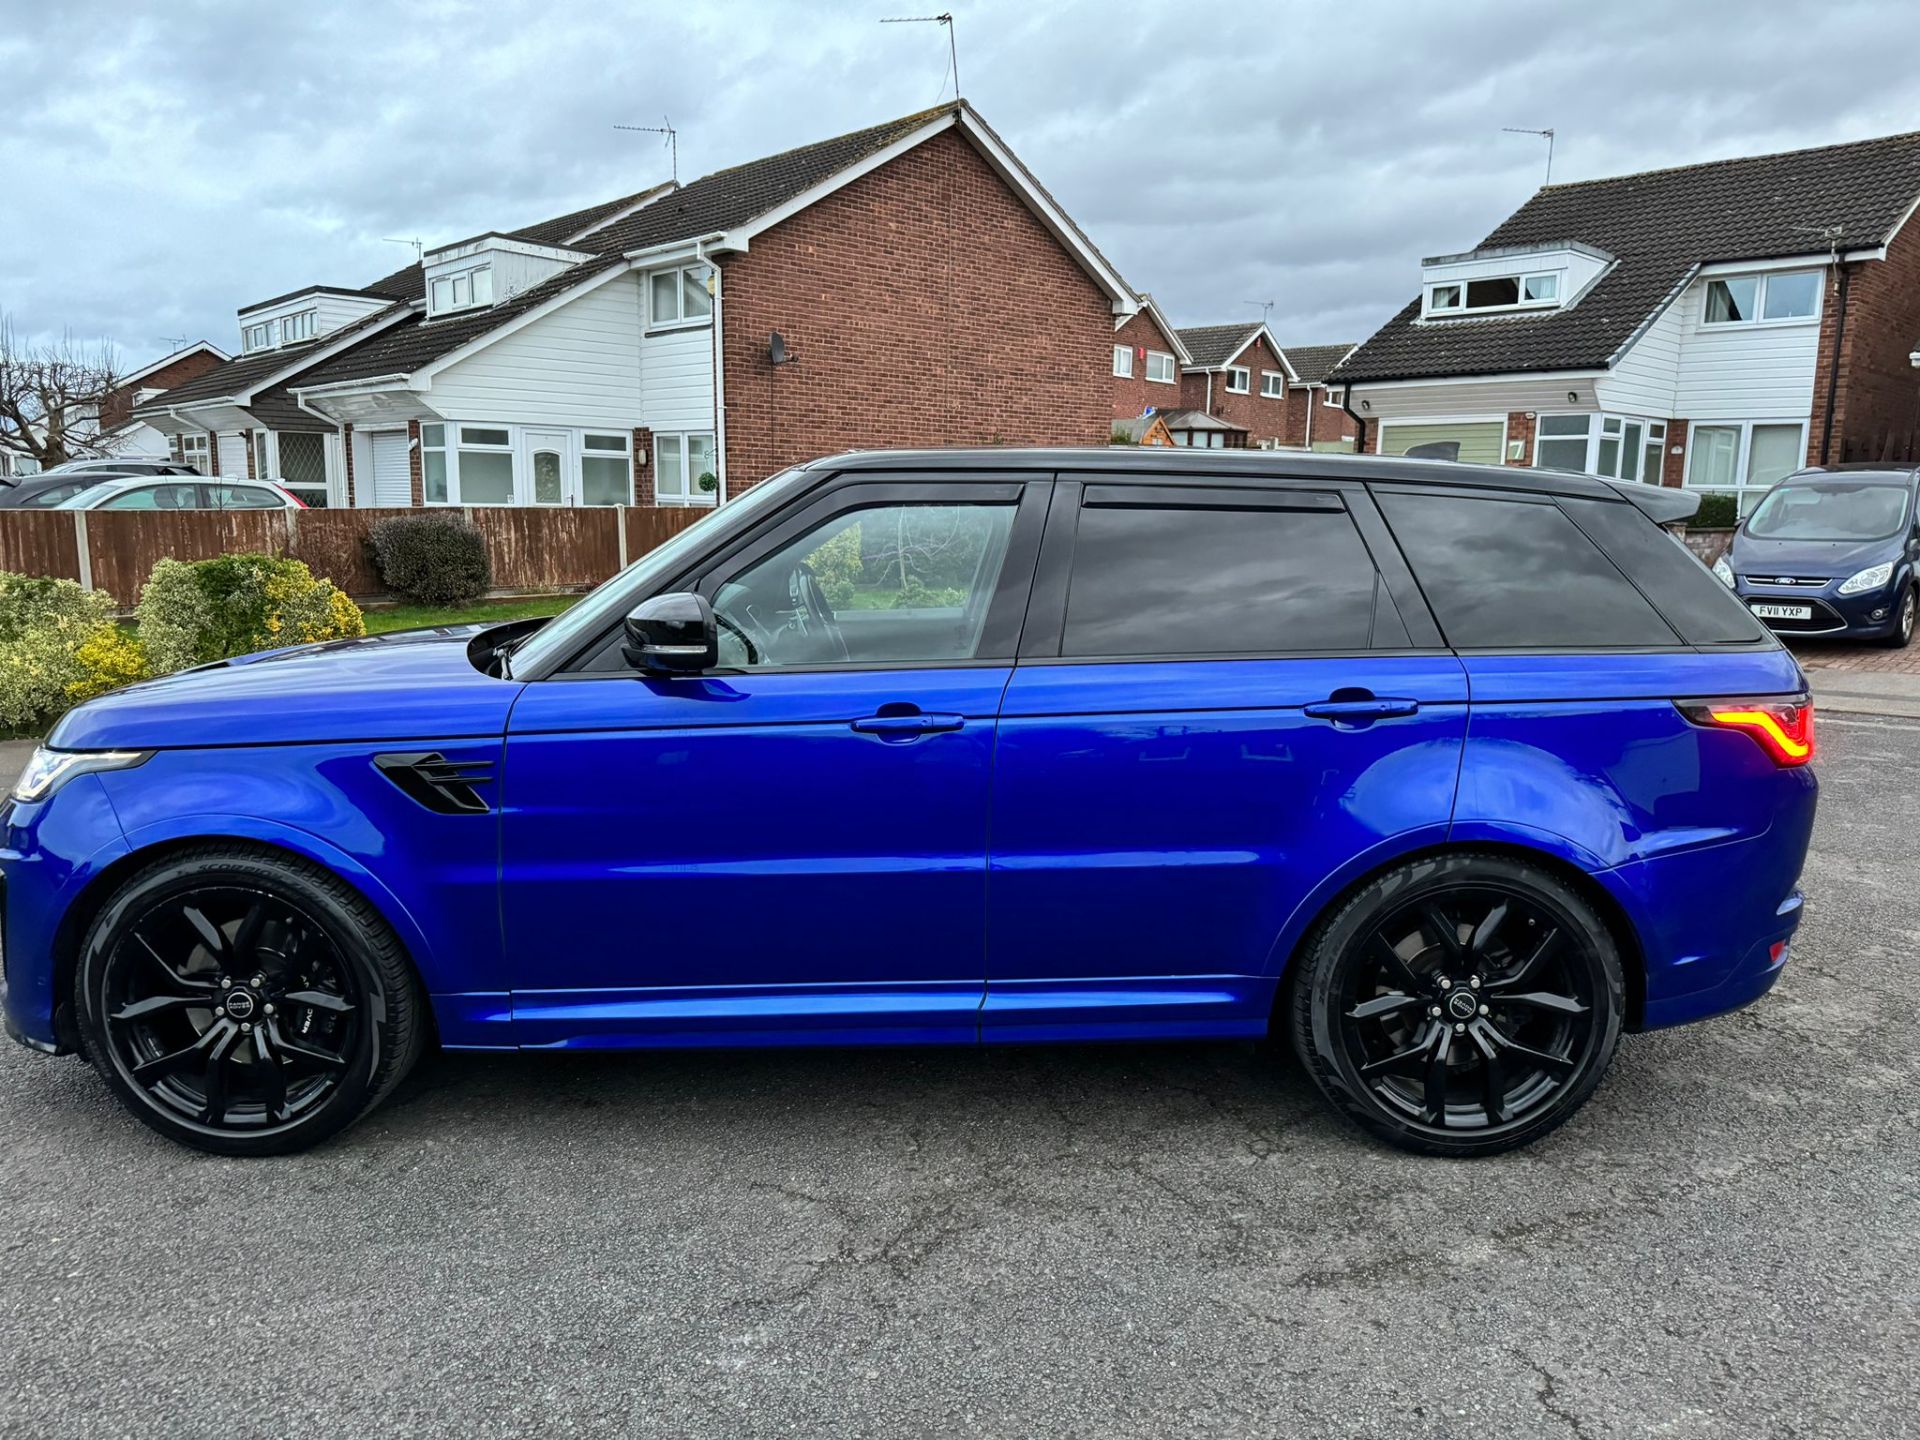 2018 18 RANGE ROVER SVR - 62K MILES WITH FULL LAND ROVER HISTORY - EXTREMELY CLEAN EXAMPLE. - Bild 6 aus 10